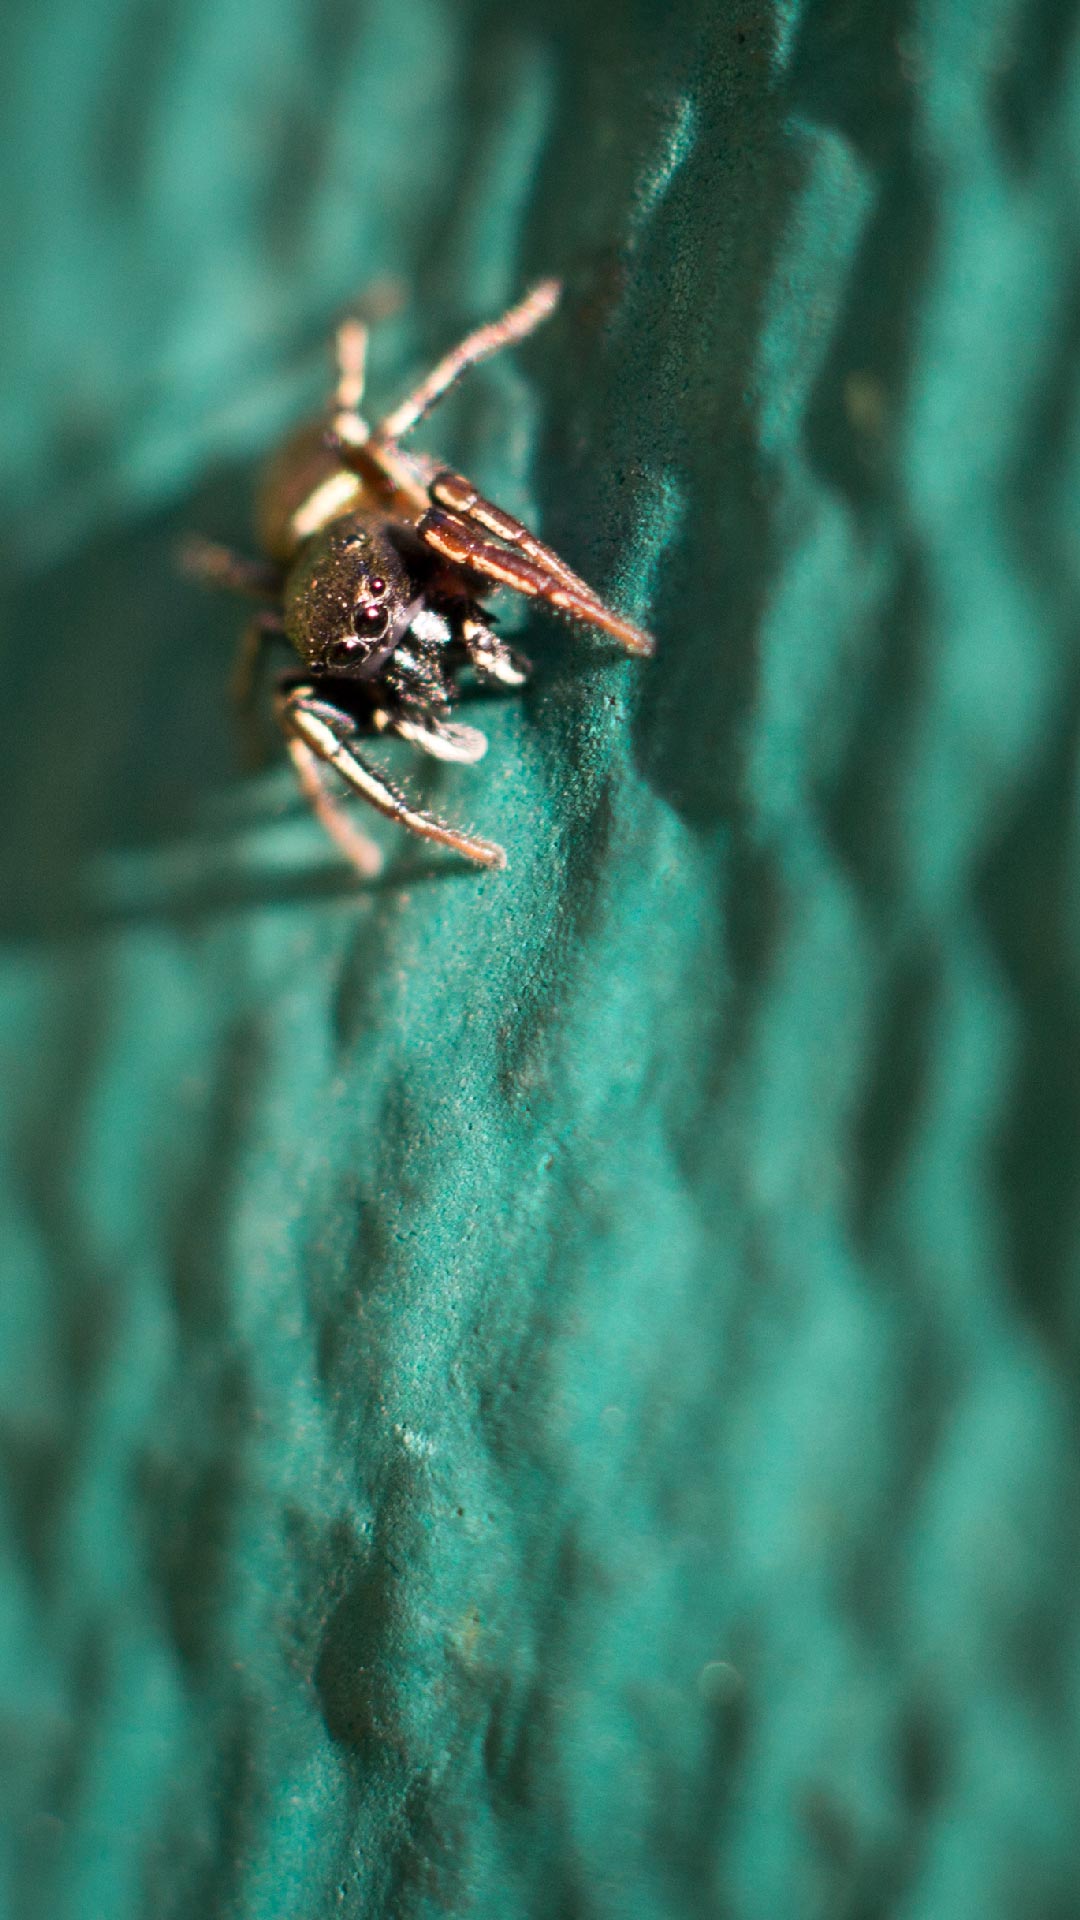 Little gold jumping spider